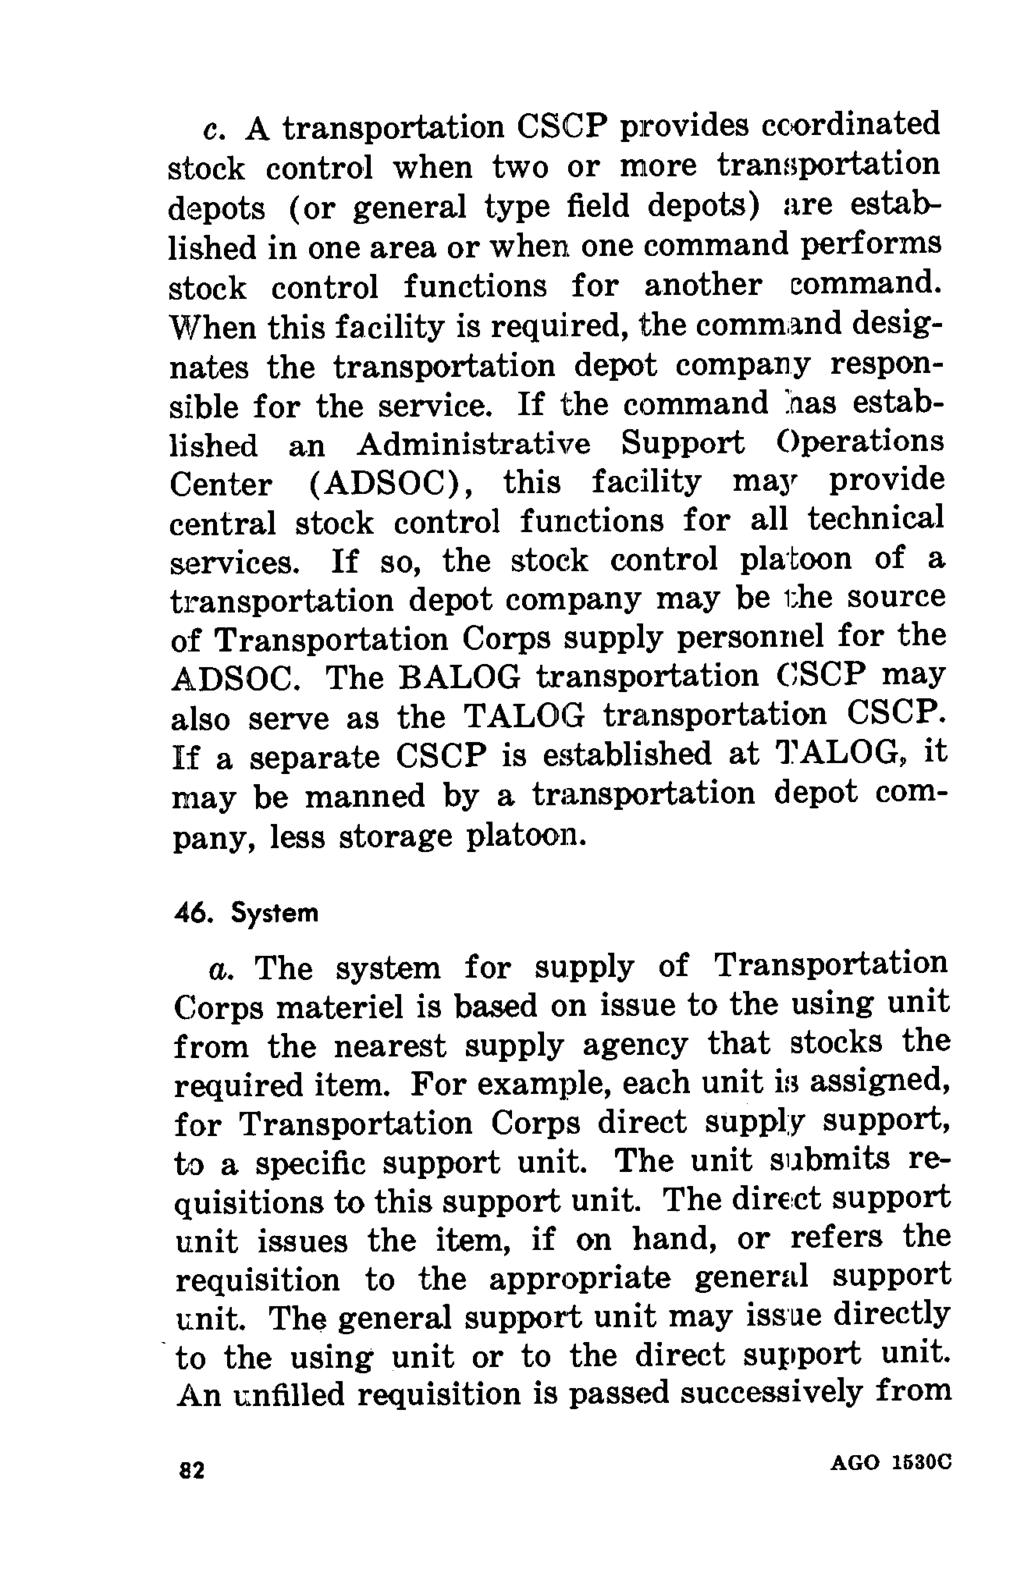 c. A transportation CSCP provides coordinated stock control when two or more transportation depots (or general type field depots) are established in one area or when one command performs stock